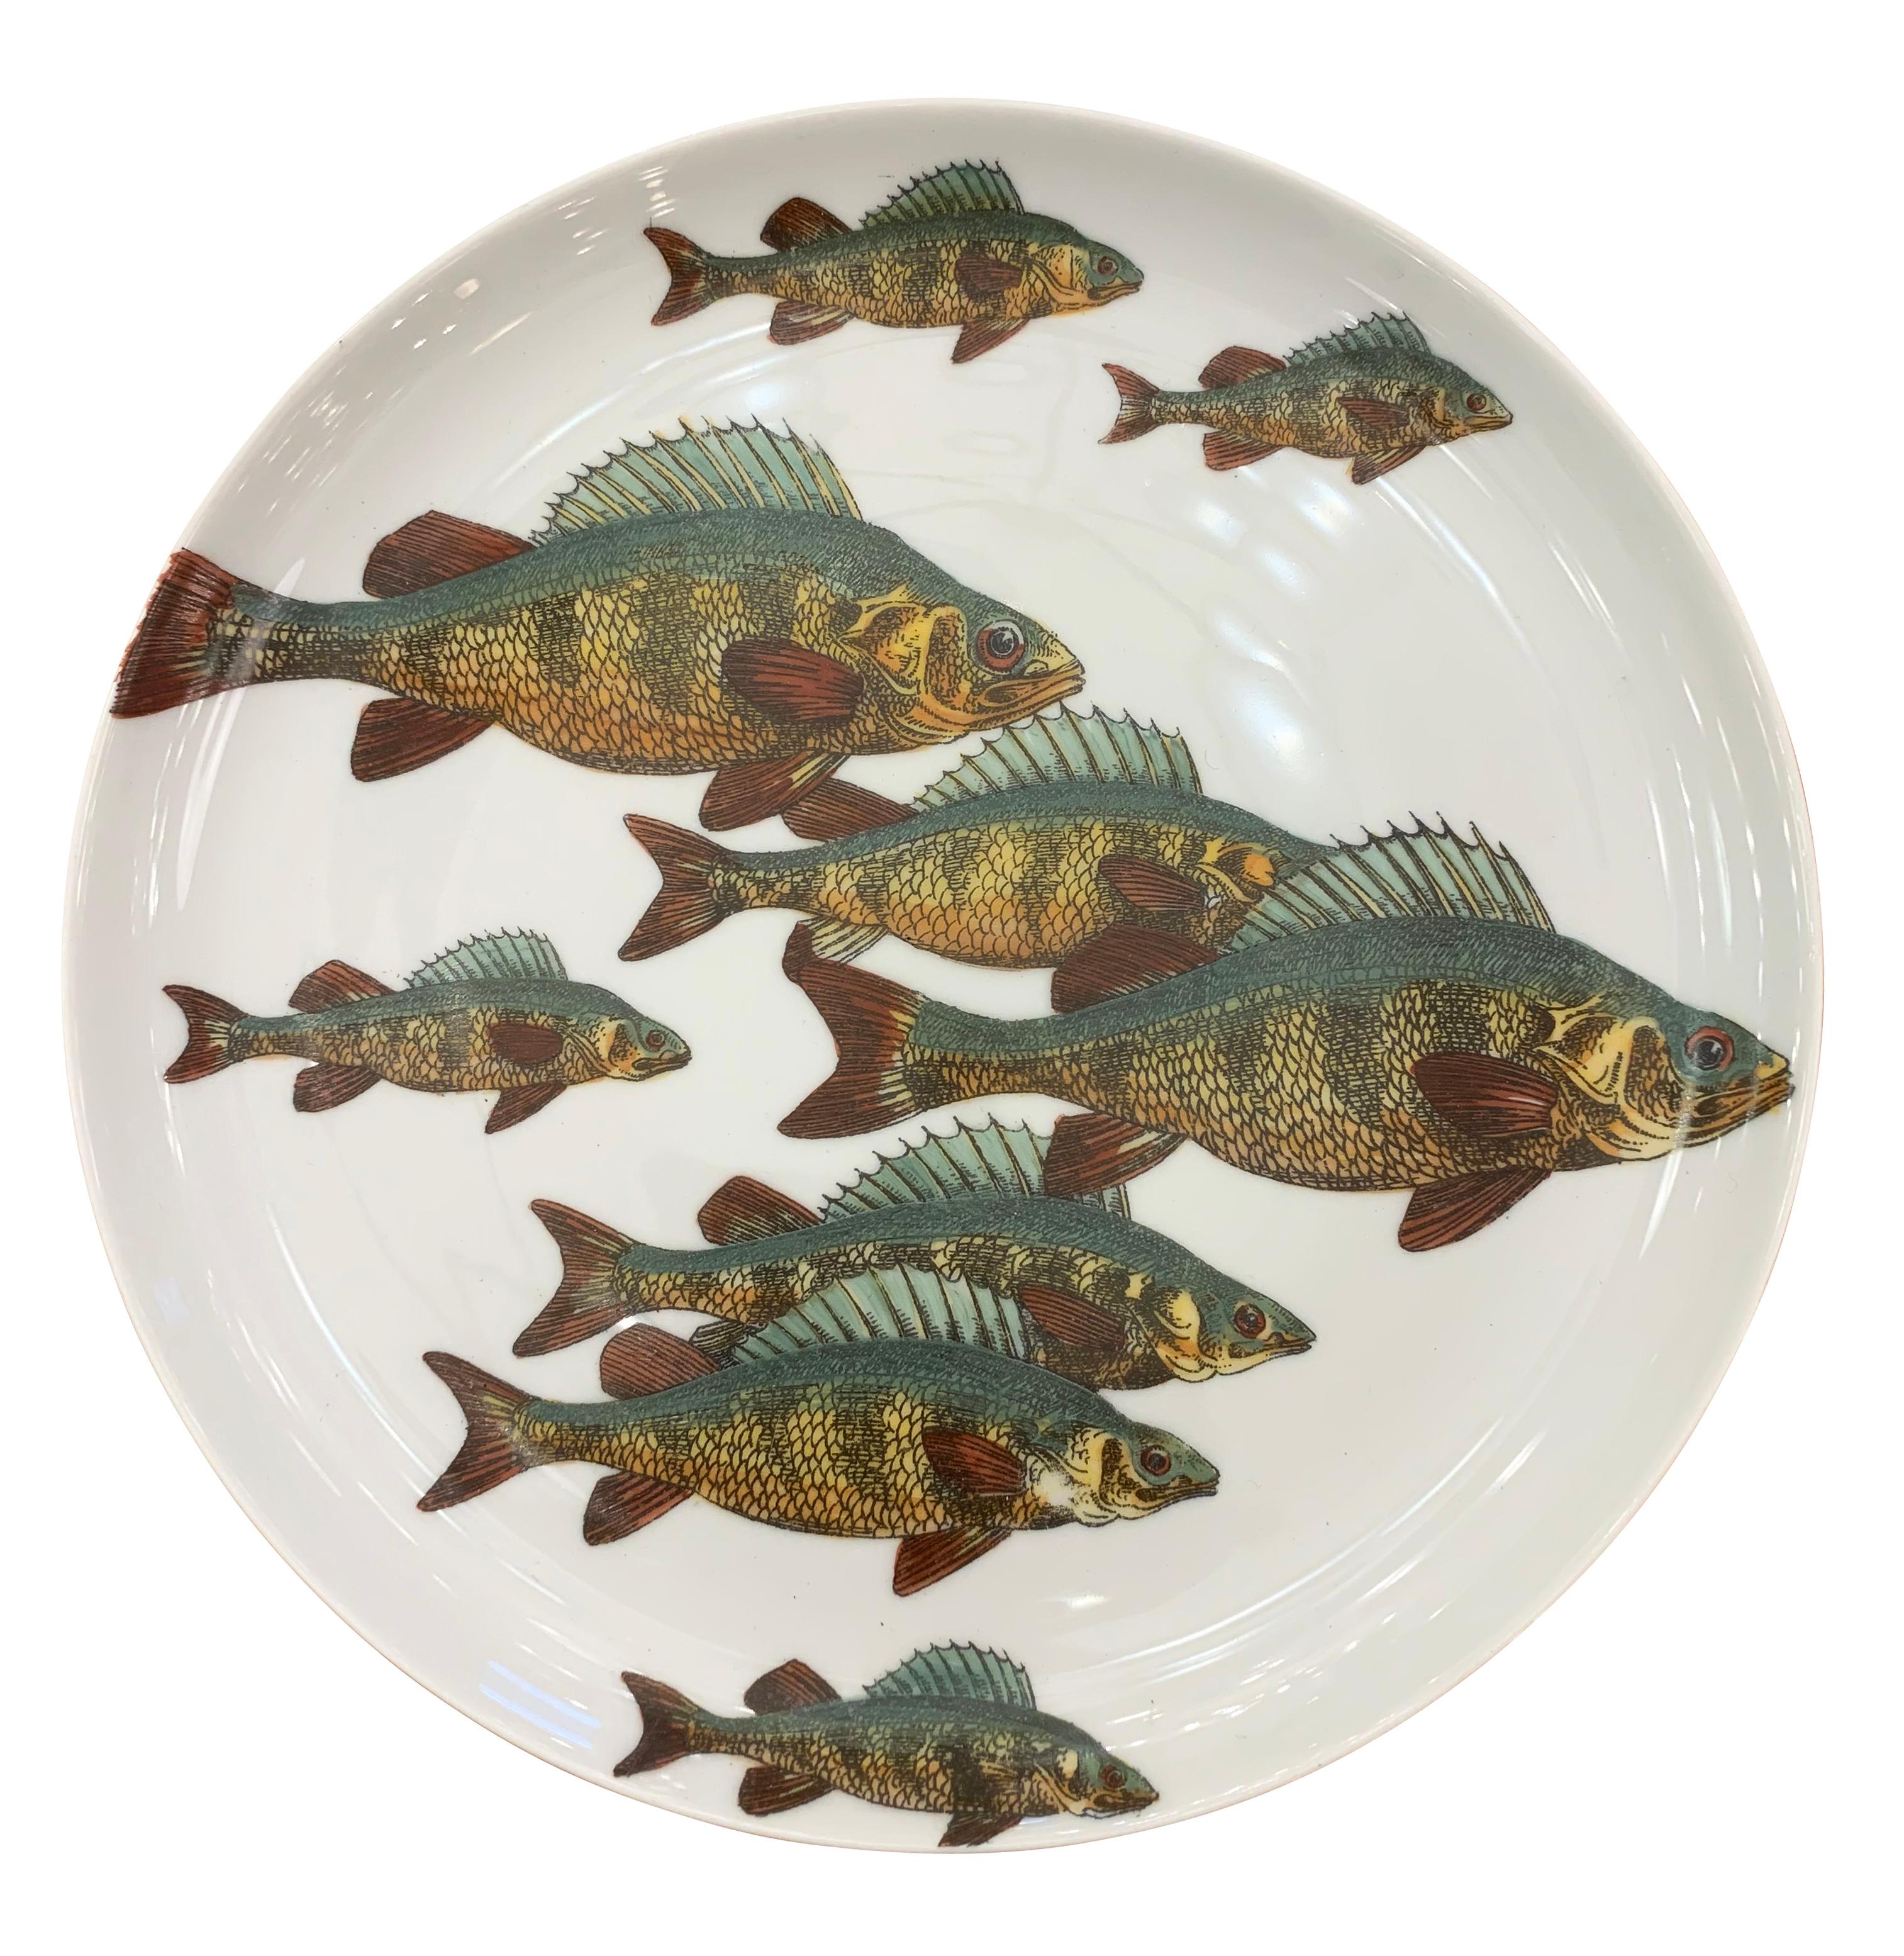 1960s Piero Fornasetti plates depicting fish. Sold individually, price per plate.

Condition: Excellent vintage condition, minor wear consistent with age and use.

Diameter: 10”.